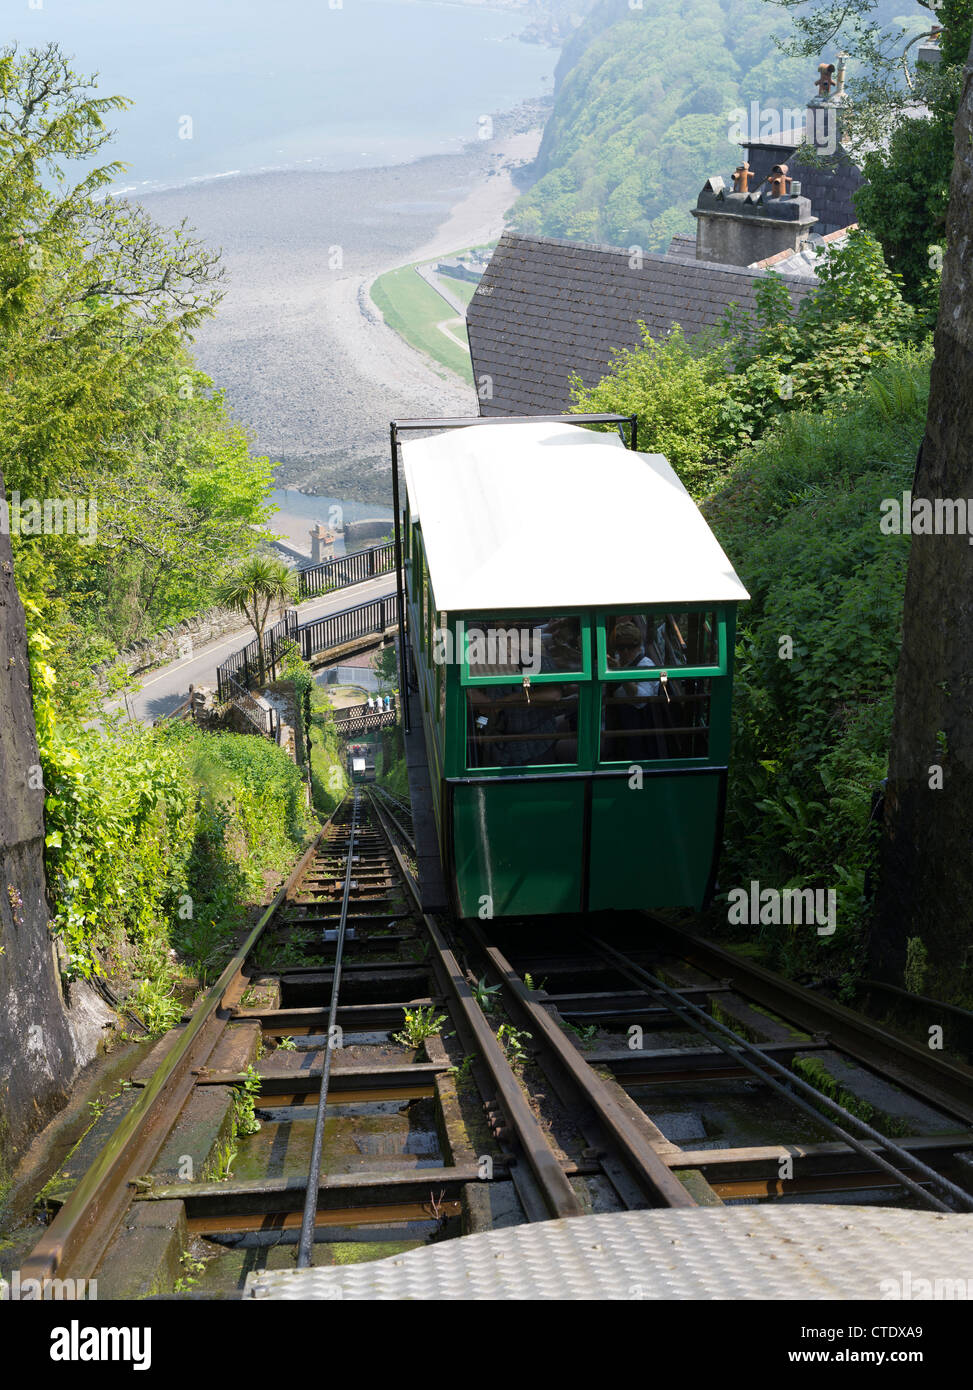 dh LYNTON DEVON funiculaire tramway Lynton et Lynmouth Cliff Railway exmoor royaume-uni Banque D'Images